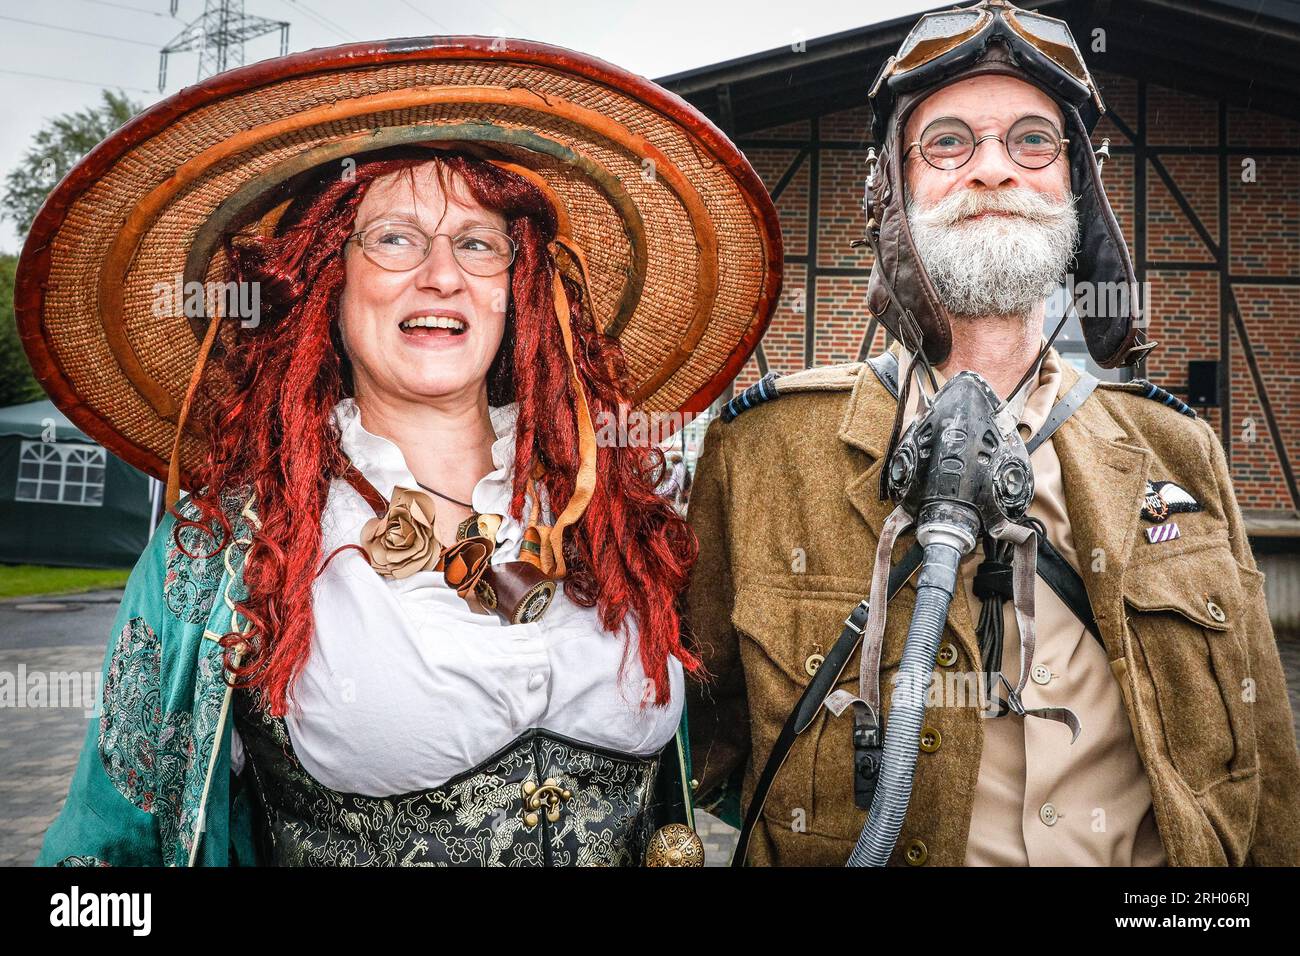 Henrichenburg, Waltrop, Germany. 12th Aug, 2023. Two participants have come well prepared for the rain. Steampunk fans, groups in costumes and visitors, many in retro-futuristic or Victorian inspired outfits, have fun despite the heavy rain showers on day one of the Steampunk Jubilee Festival weekend at the historic Henrichenburg boat lift, a listed architectural landmark and industrial heritage site. Credit: Imageplotter/Alamy Live News Stock Photo